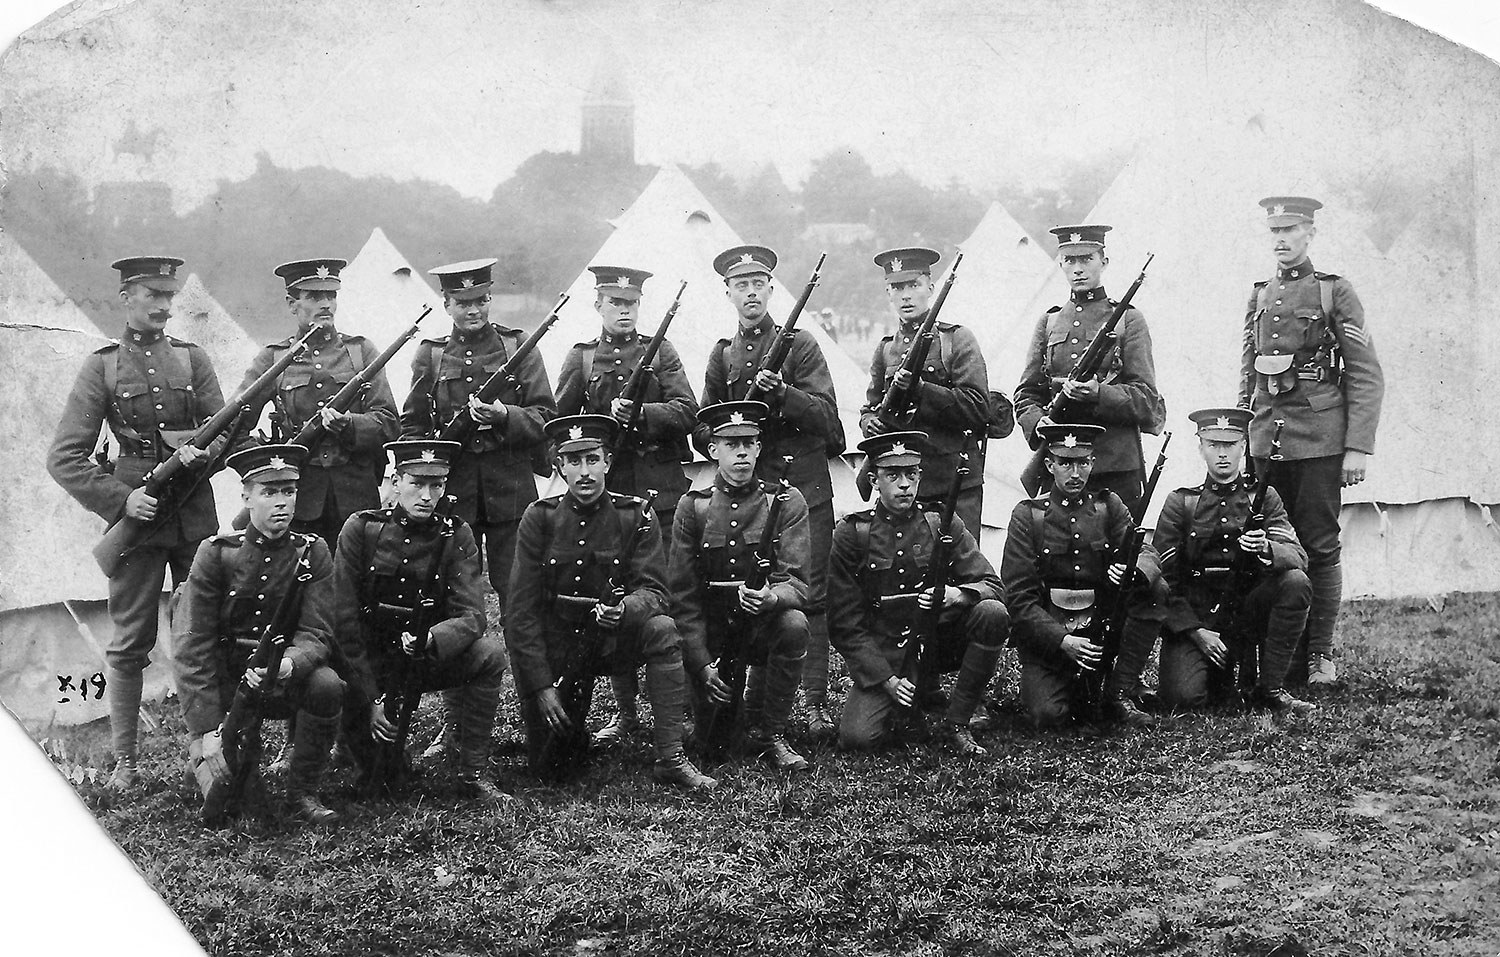 Looking considerably more martial is this group of finely turned-out soldiers from Toronto's Queen's Own Rifles, stationed in England before the start of the First World War.